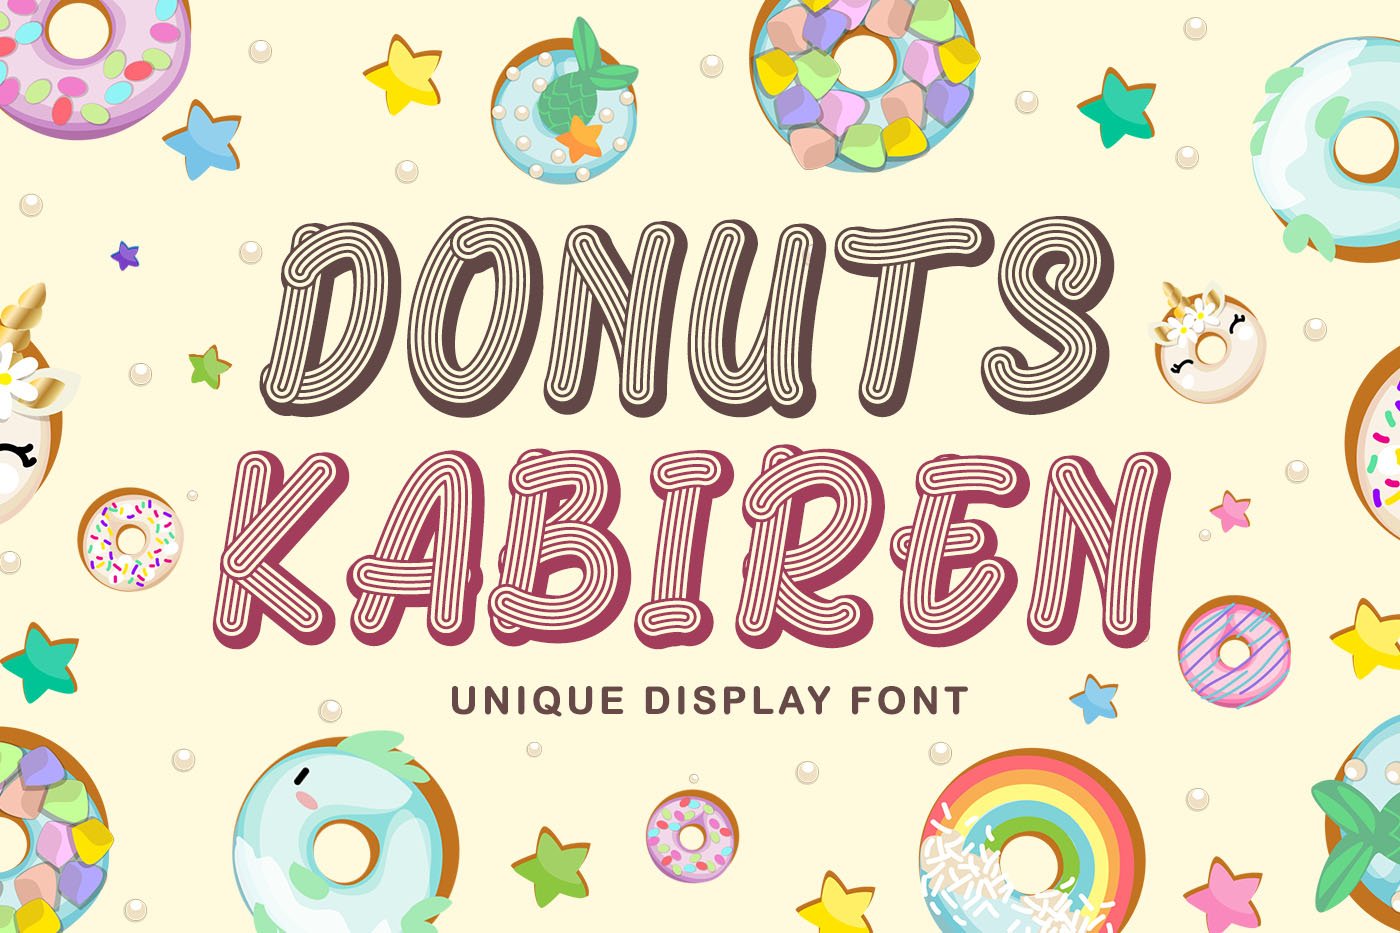 Donuts Kabiren - Quirky Craft Font cover image.